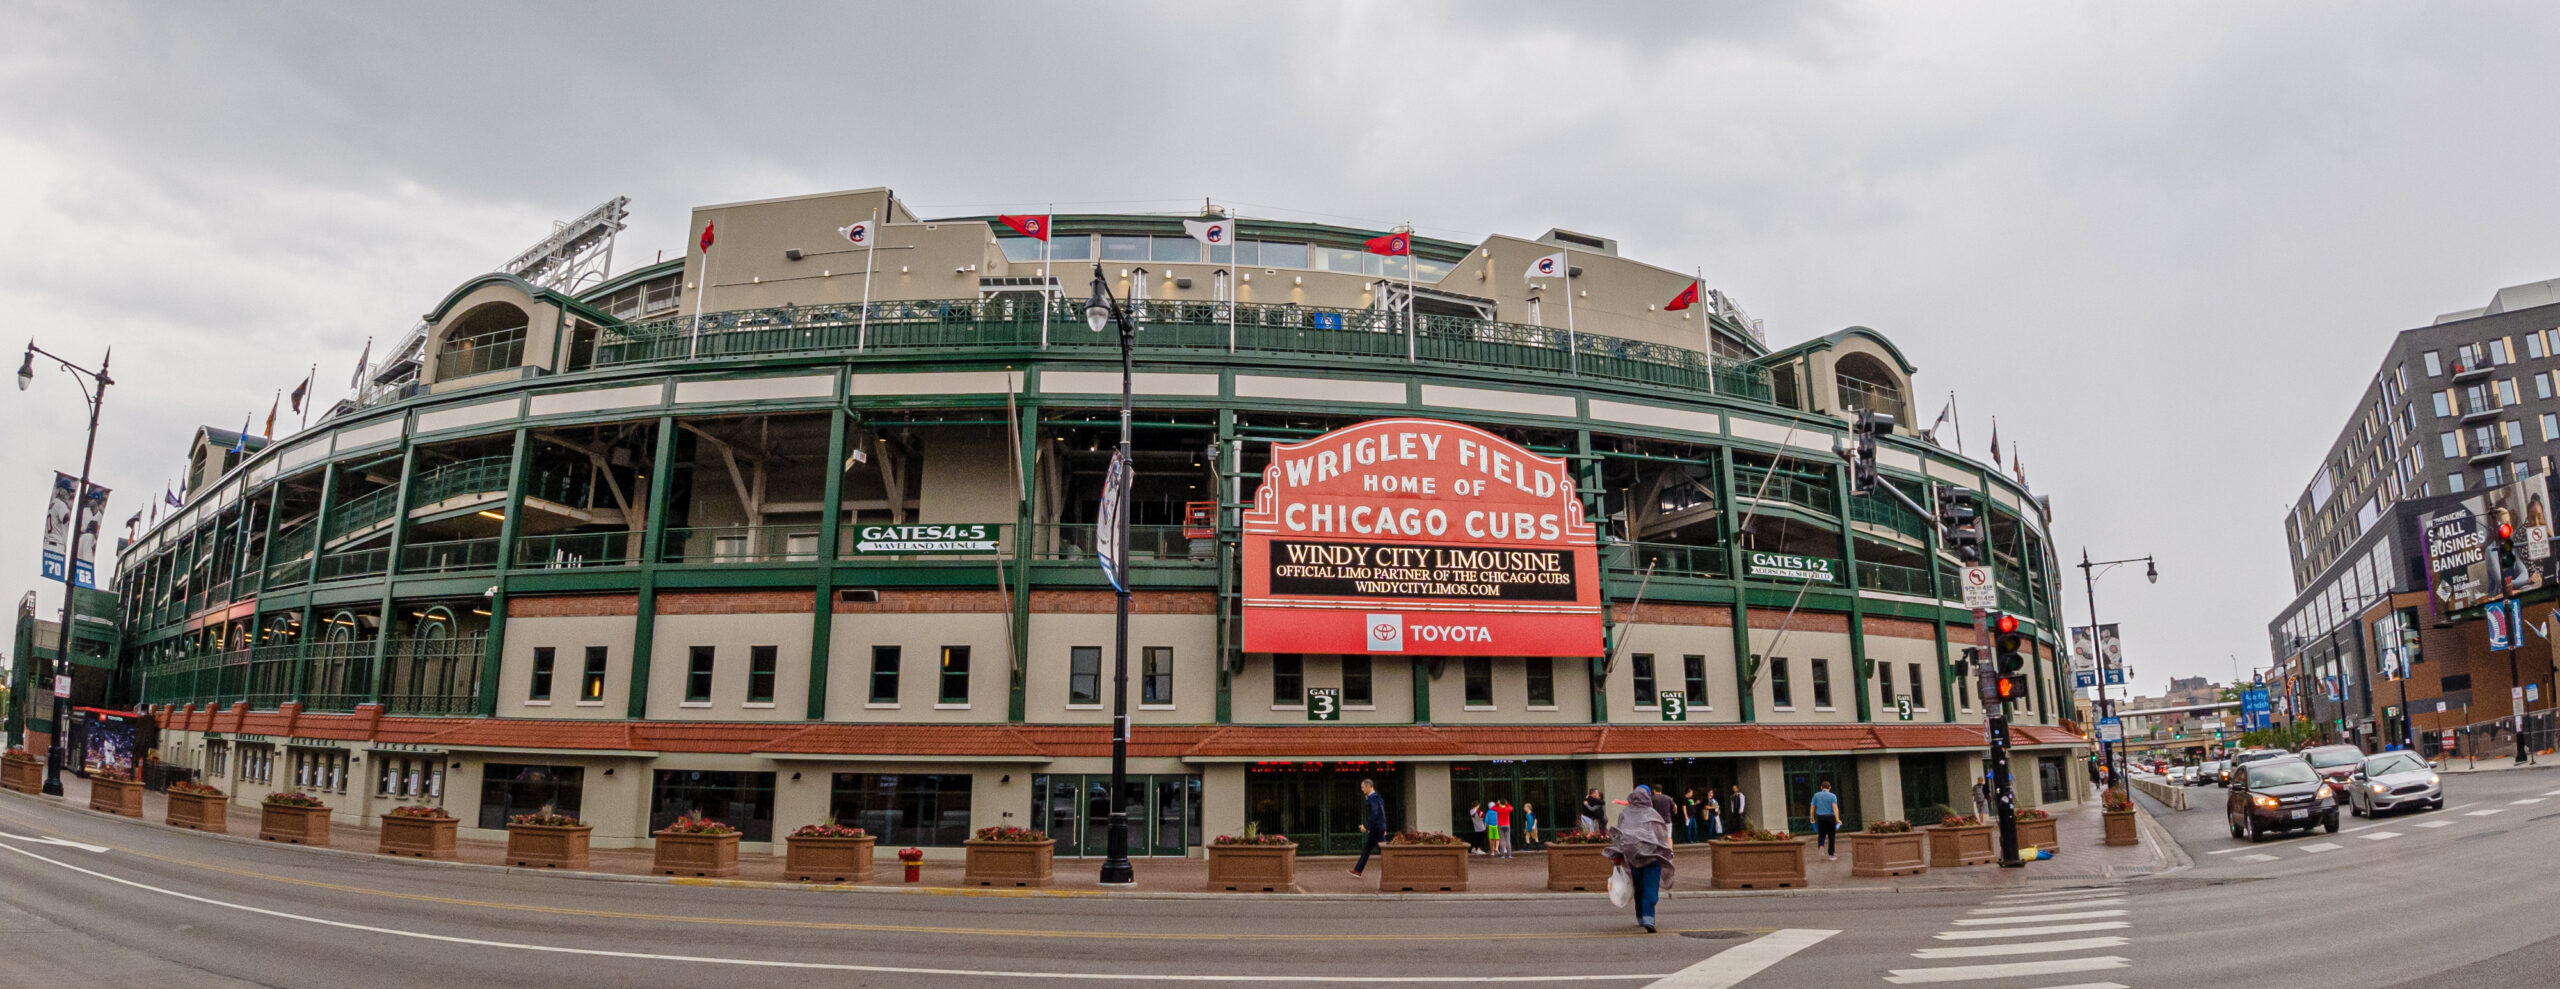 Wrigley Field Bag Policy Everything You Need to Know The Stadiums Guide